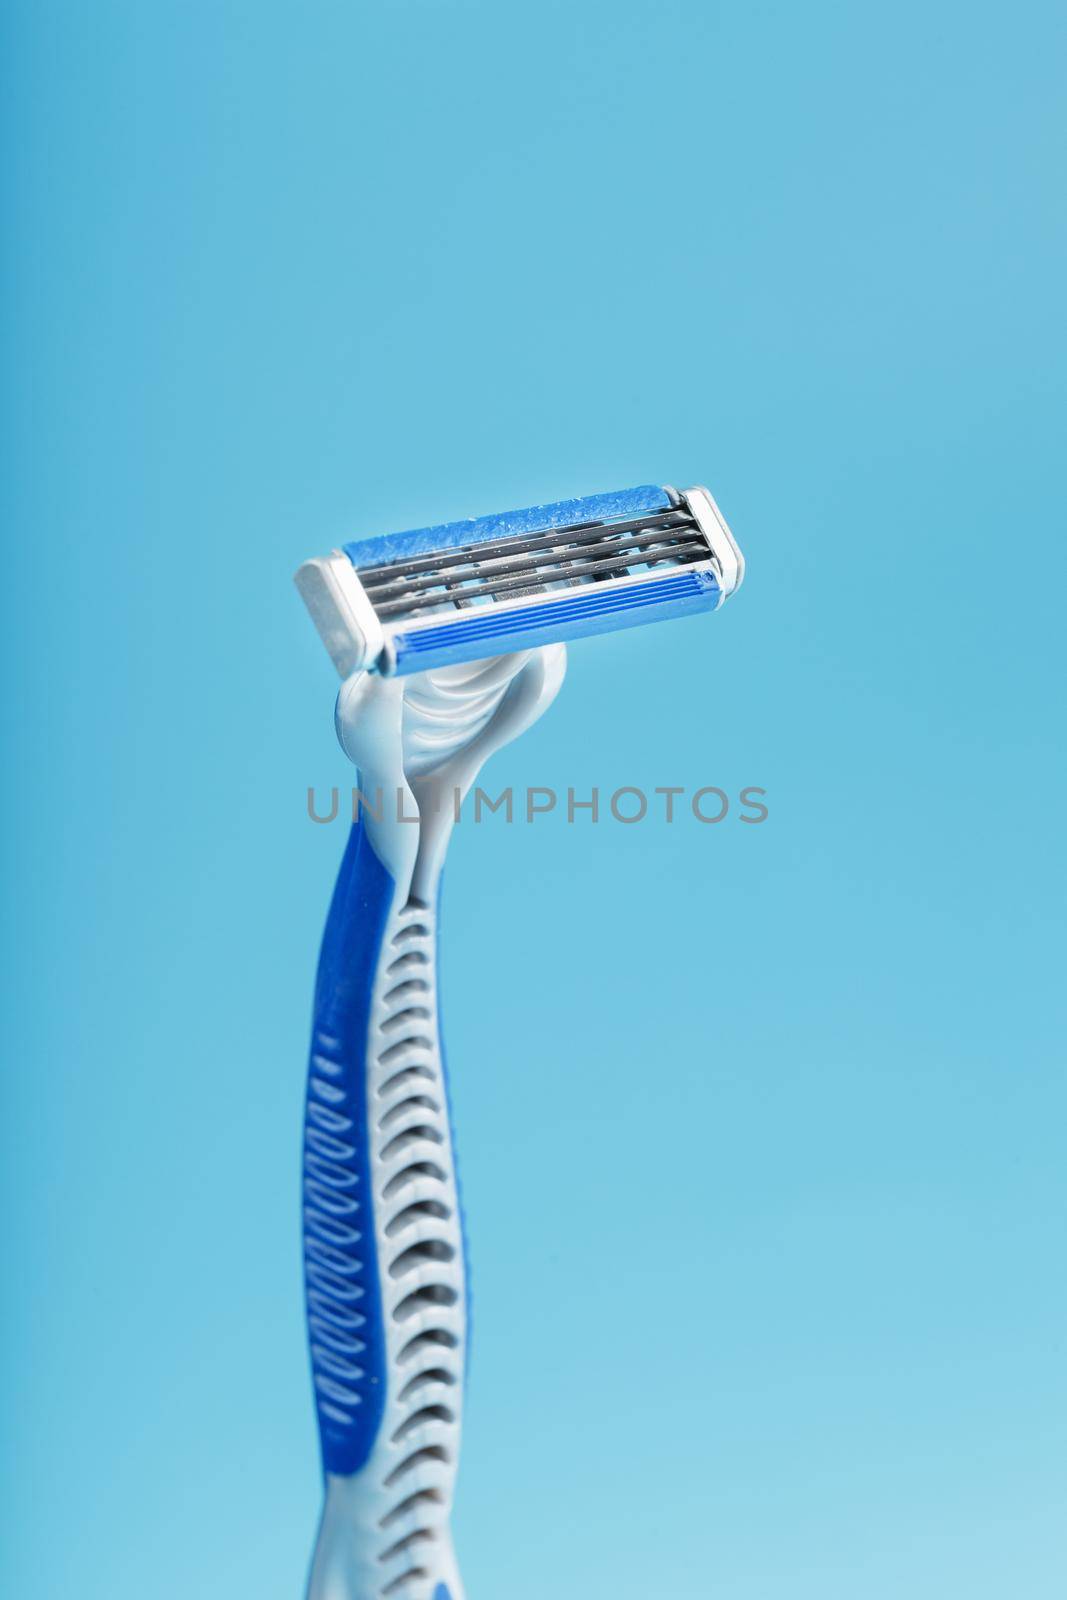 Blades of a new shaving machine on a blue background close-up free space